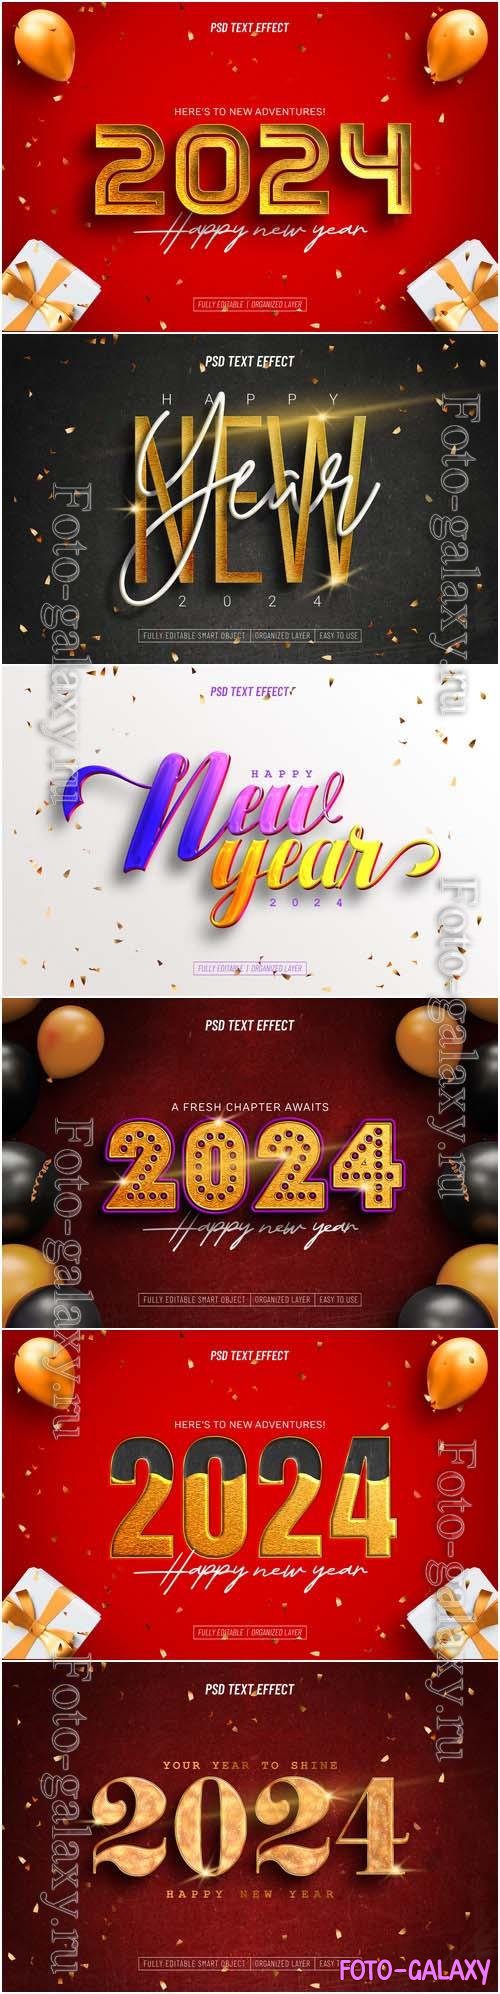 2024 Happy new year text effect vol 2